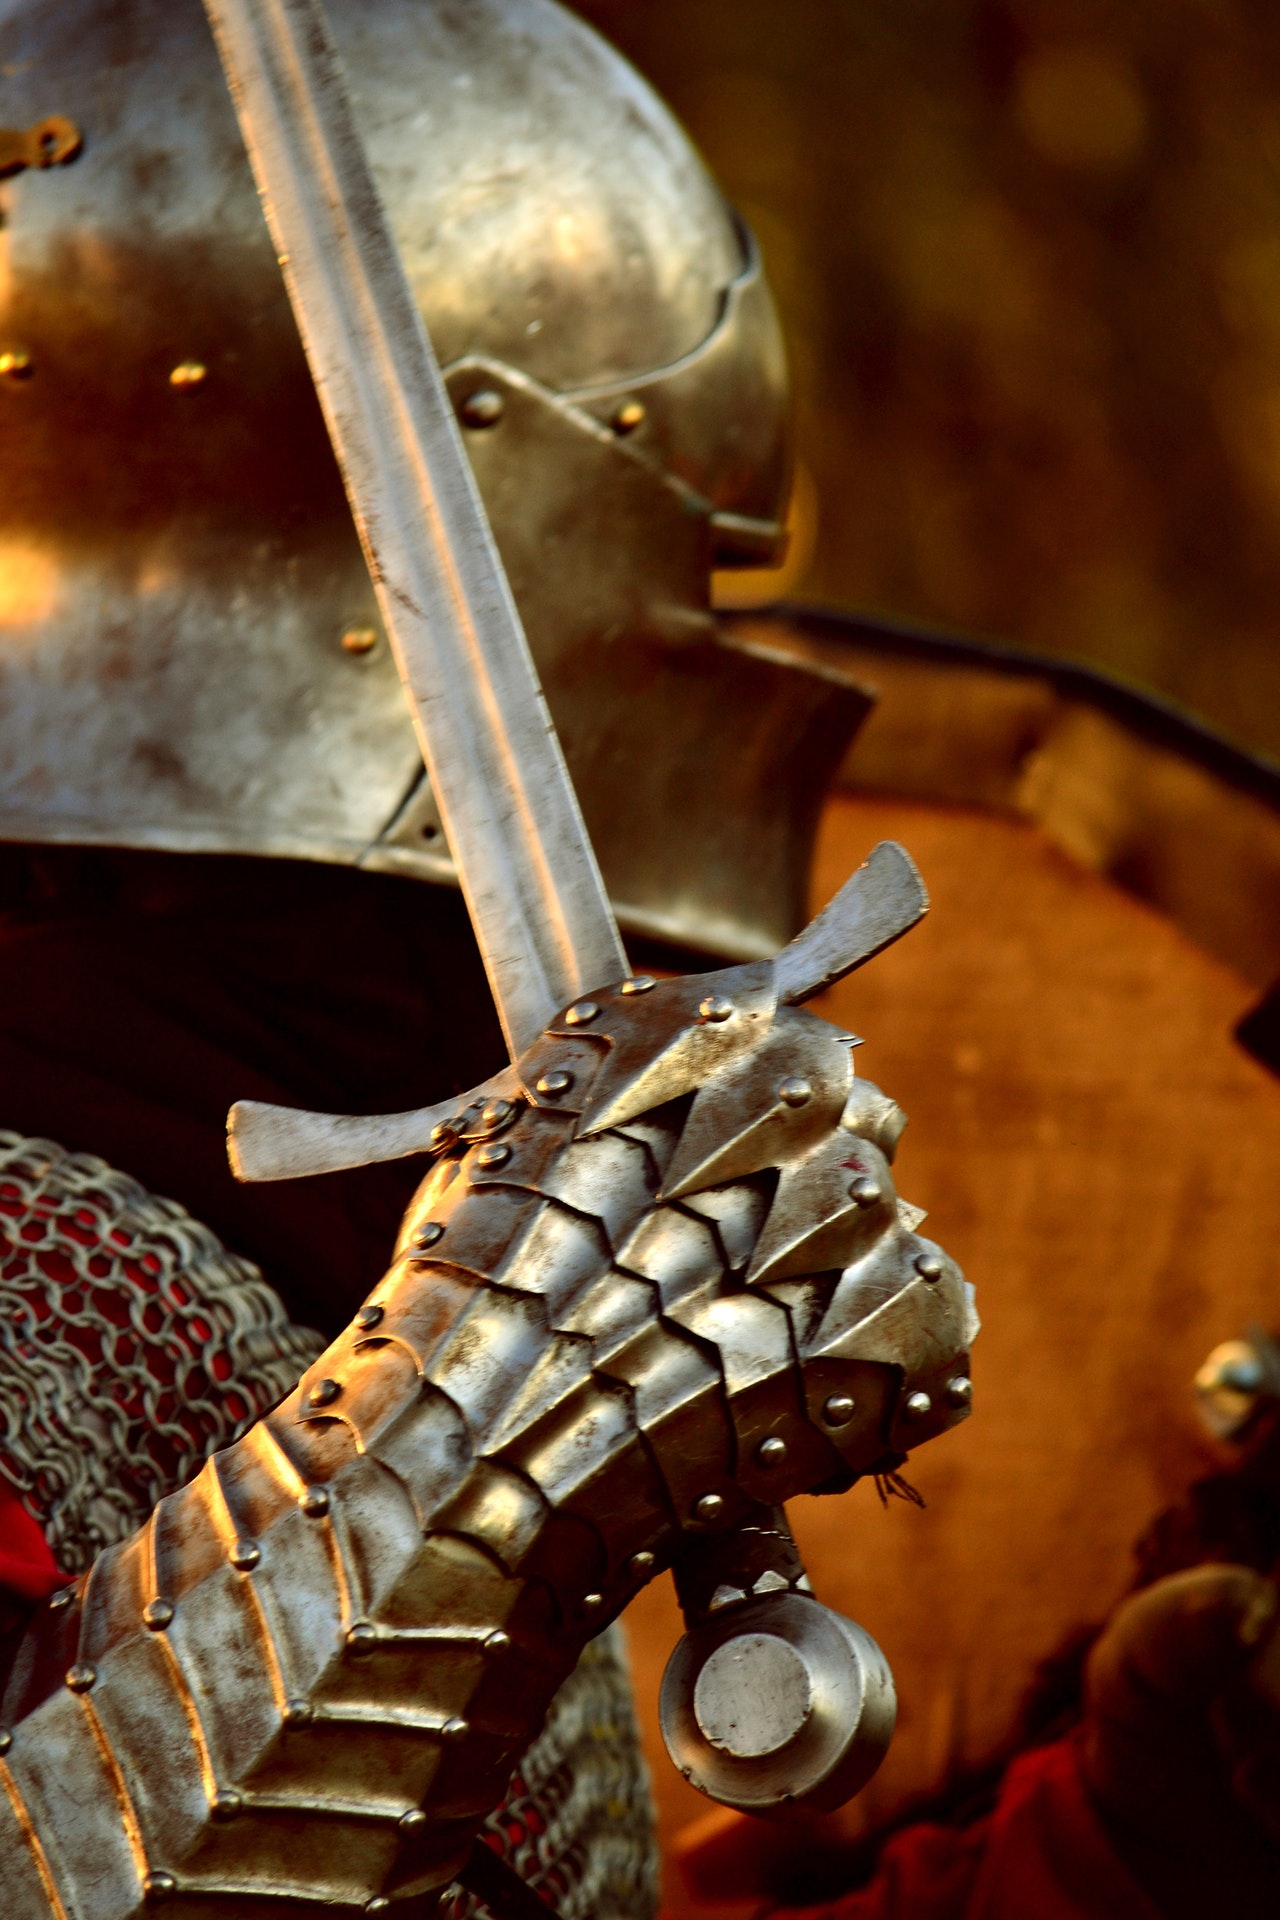 A knight in full armour and helmet stands in dusky light, sword and gauntleted fist raised in the foreground, ready for battles